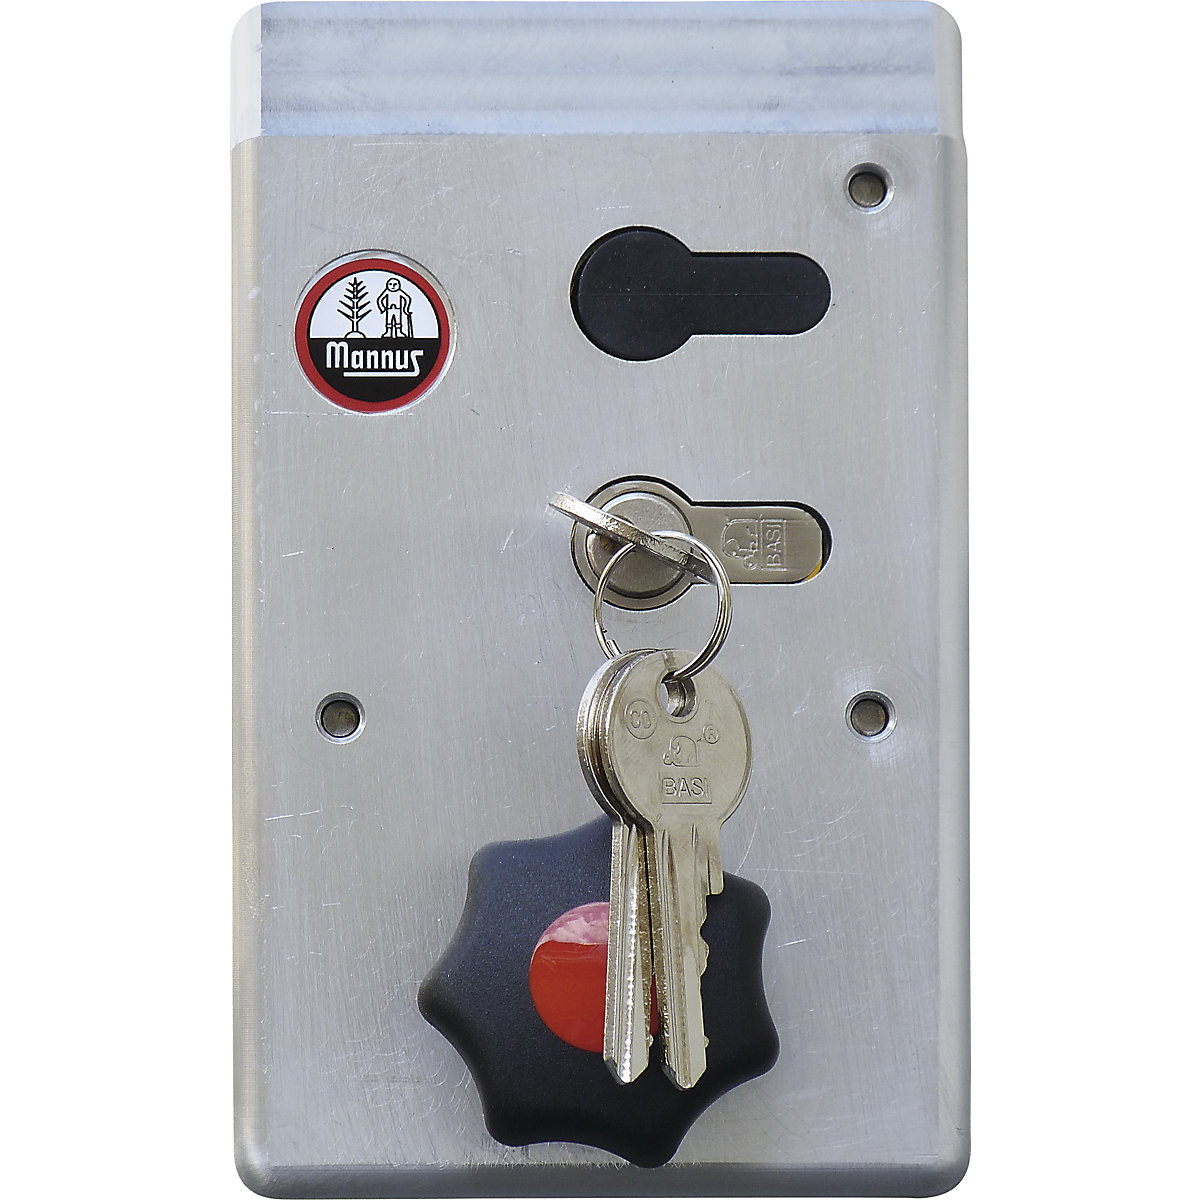 Lock holder – Mannus, for access barrier, with profile cylinder lock-2